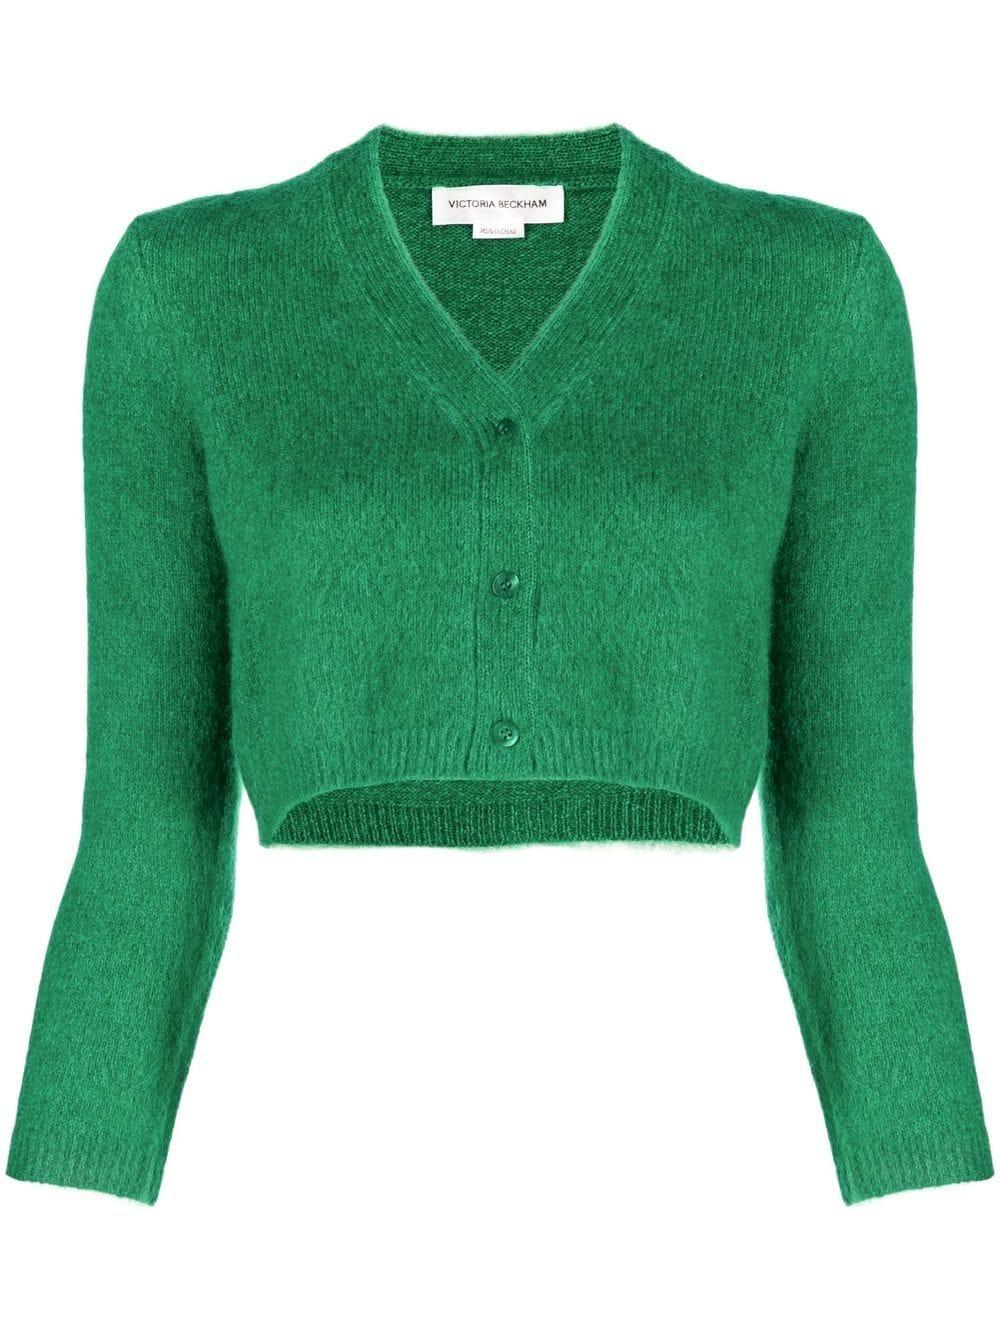 Victoria Beckham Wool Cropped V-neck Cardigan in Green | Lyst